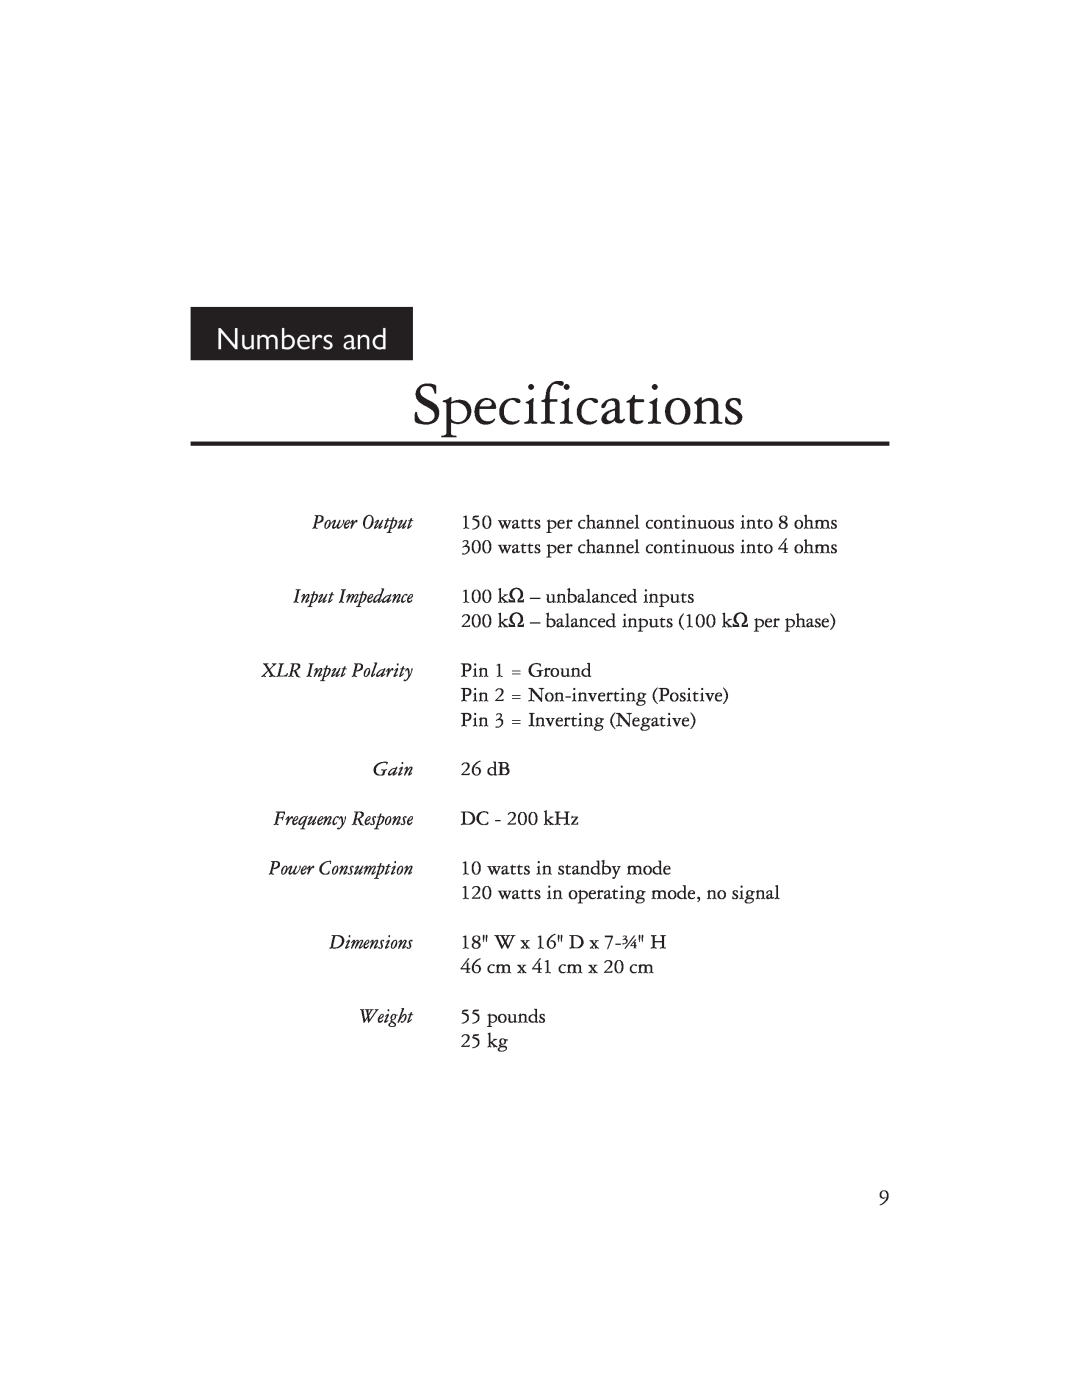 Ayre Acoustics V-5x owner manual Specifications, Numbers and 